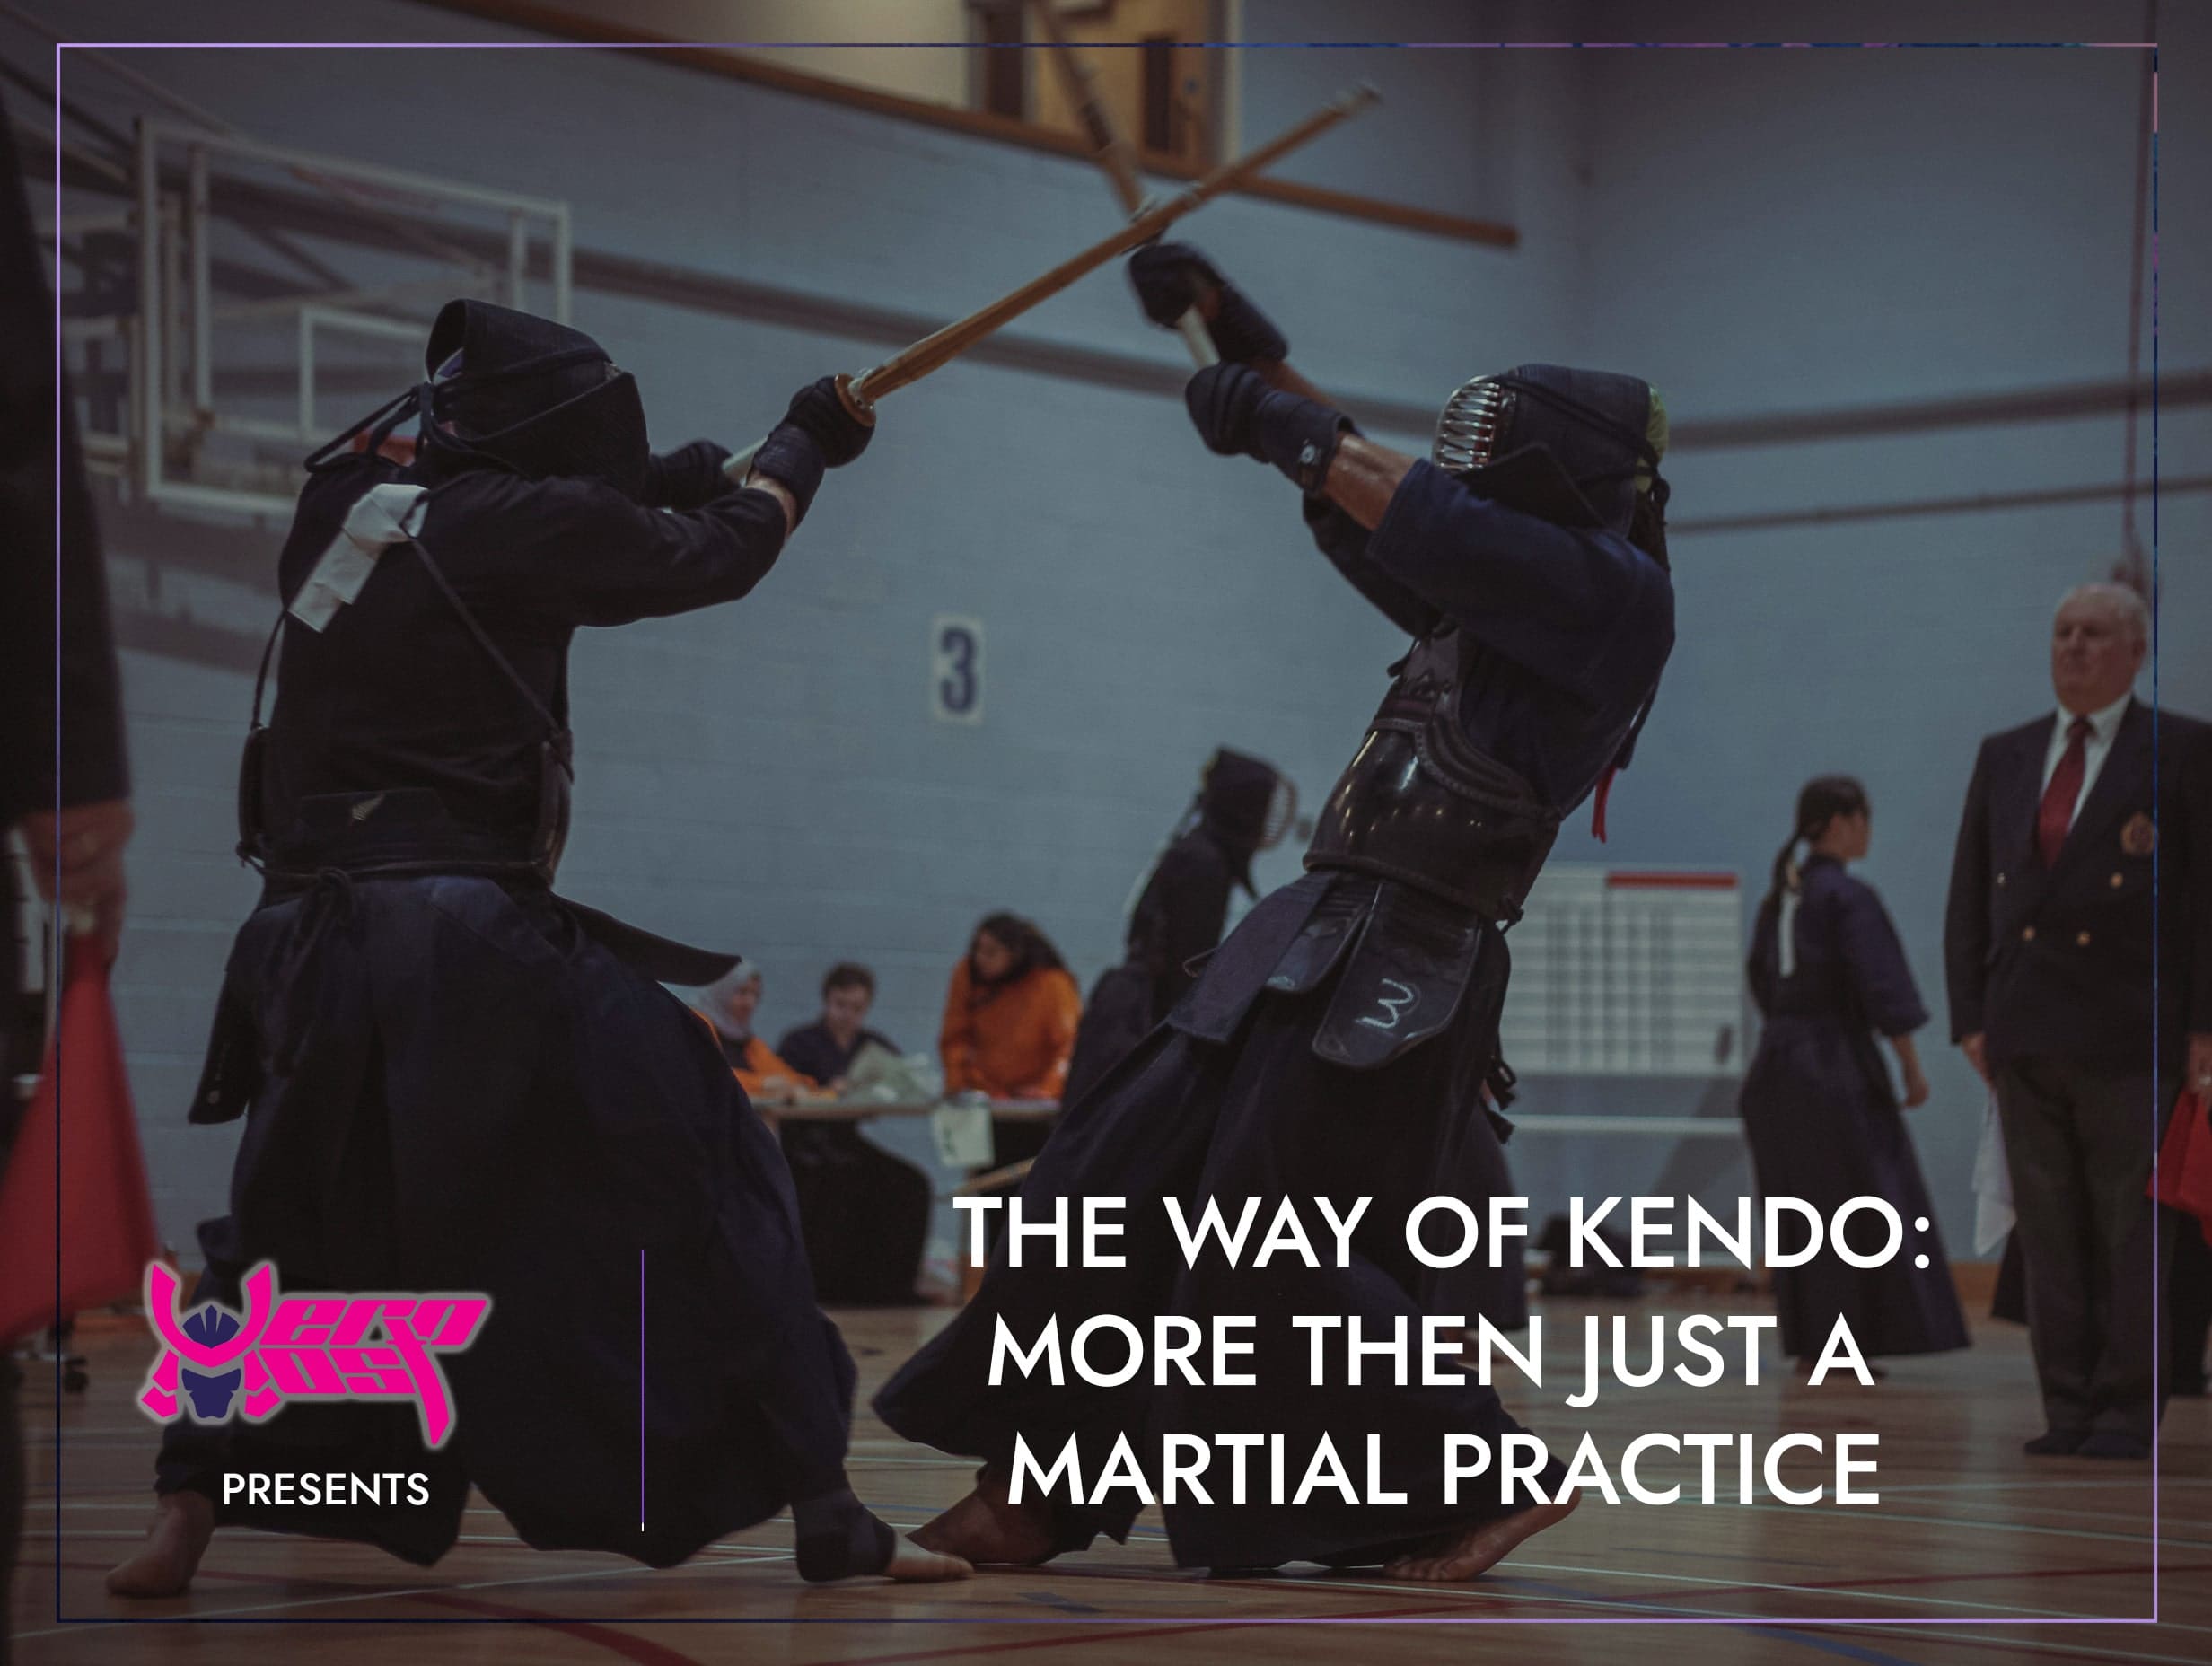 The Way of Kendo More Then Just a Martial Practice